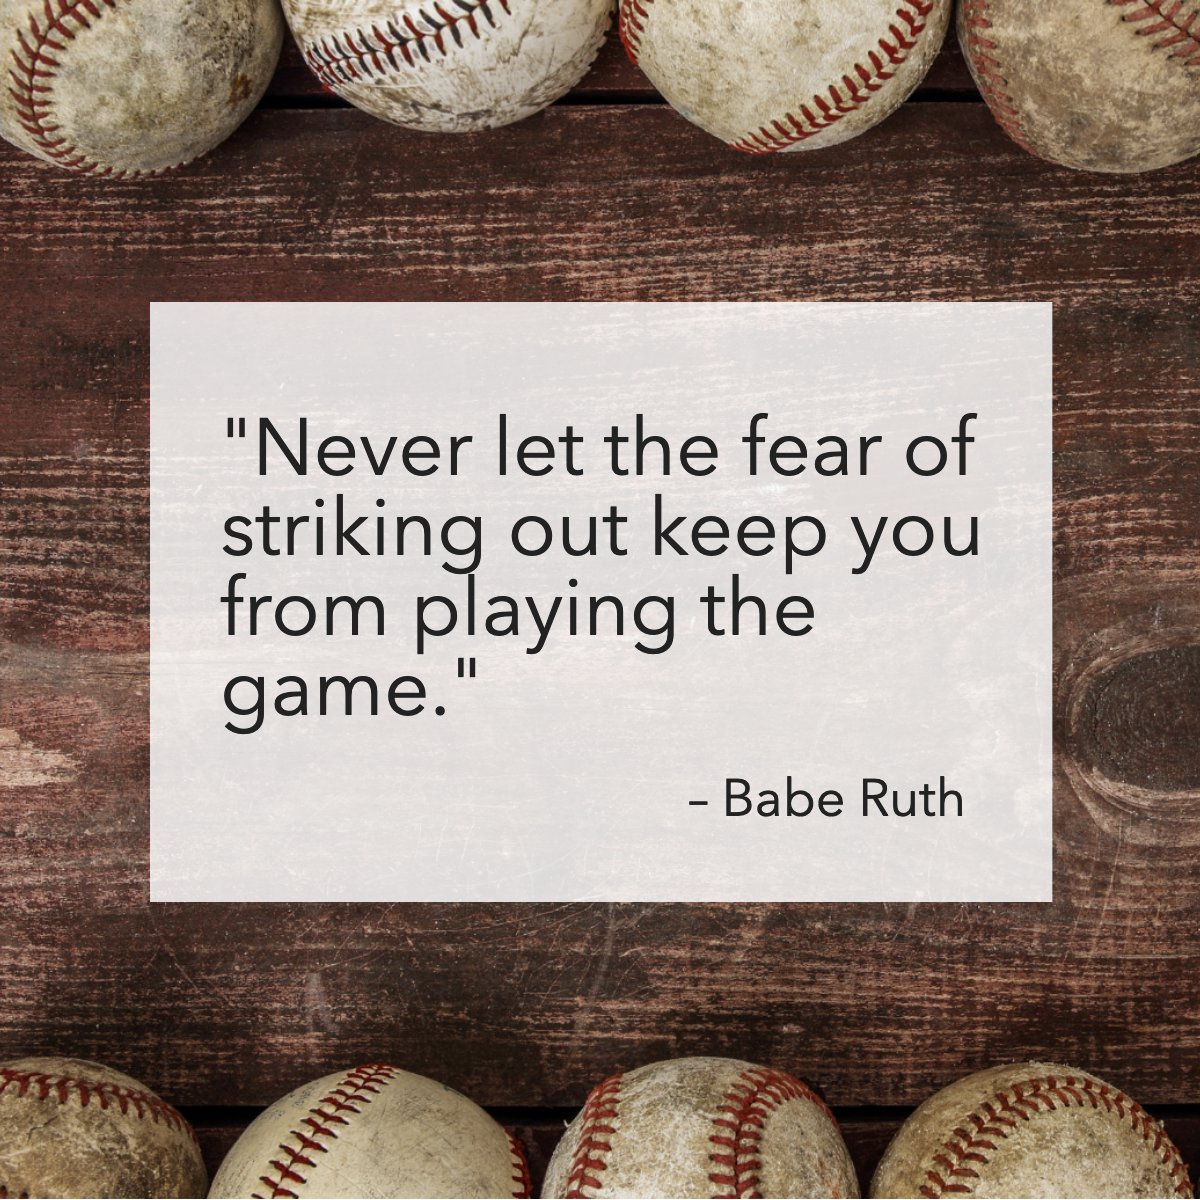 I guess we just have to keep playing! 🙏

Share with us a motivational quote! 💭

#inspiring    #motivation    #sports    #baseball    #baberuth    #quote
#swflrealestate #realestate #capecoral #sanibel #fortmyers #capecoralrealtor